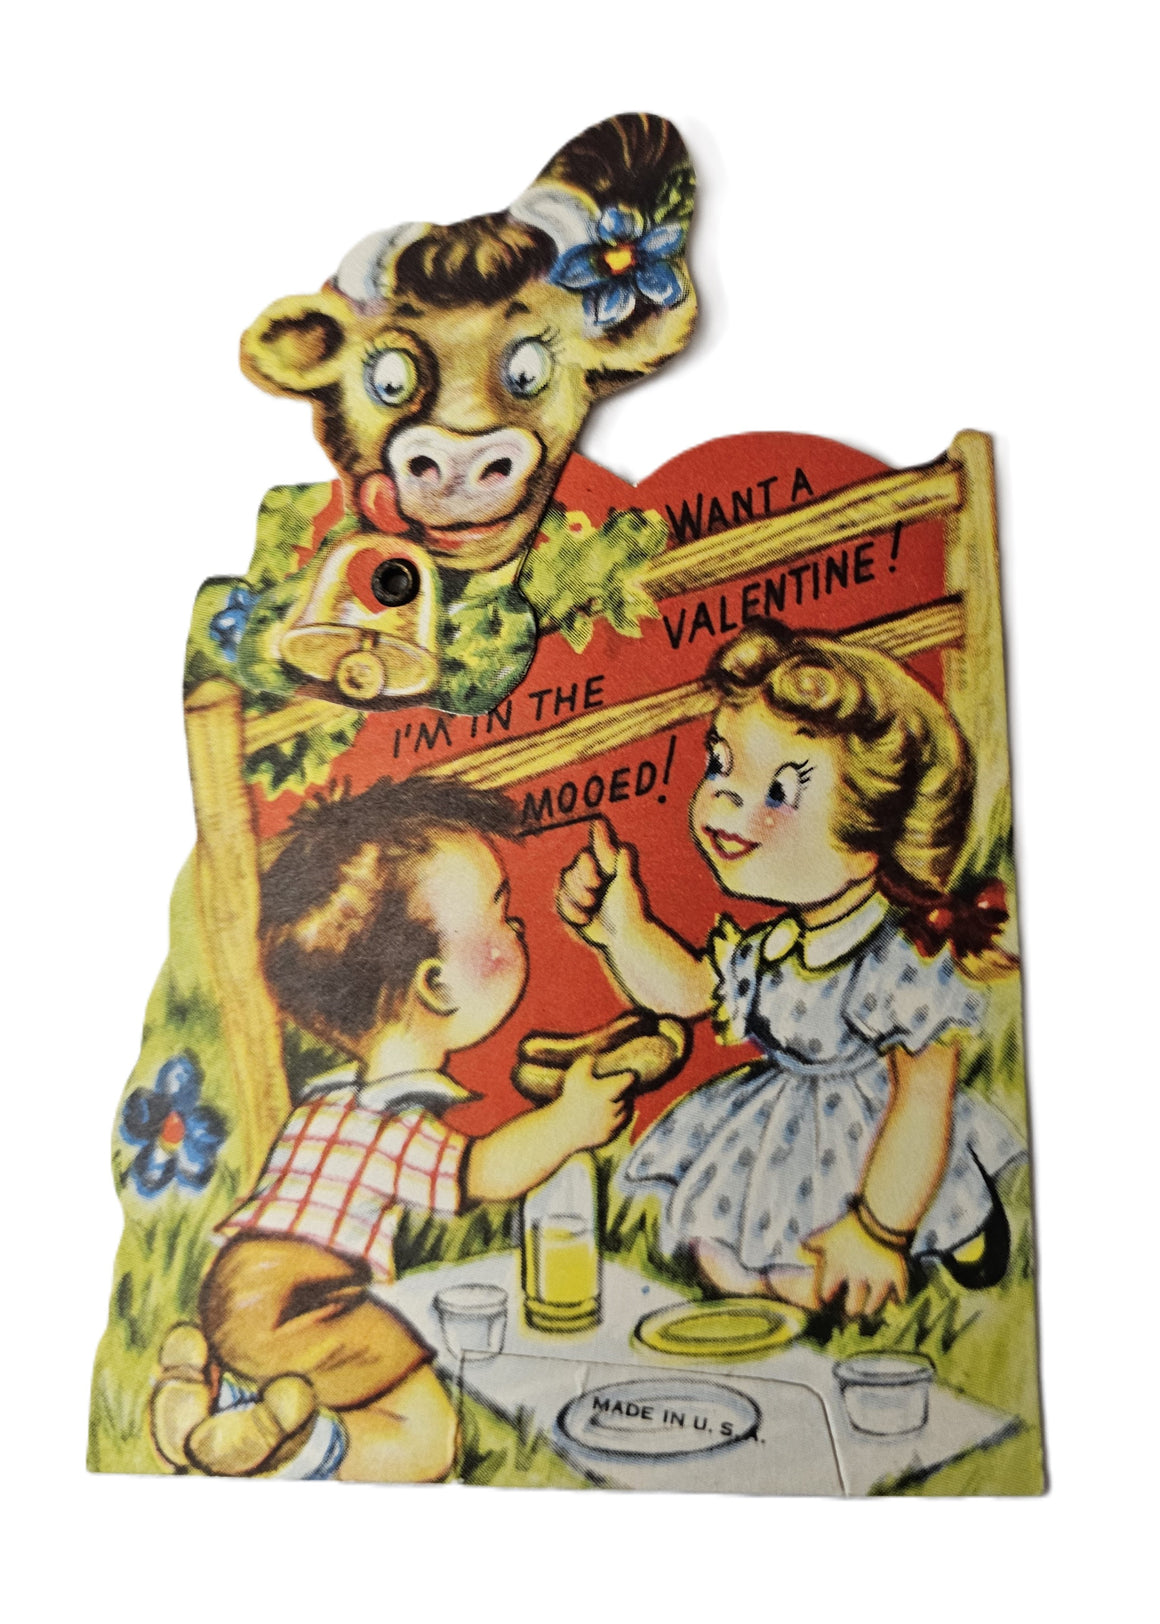 Vintage 1950s Mechanical Valentine Card Little Boy and Girl Having Picnic While Cow with Bell Peeks Over